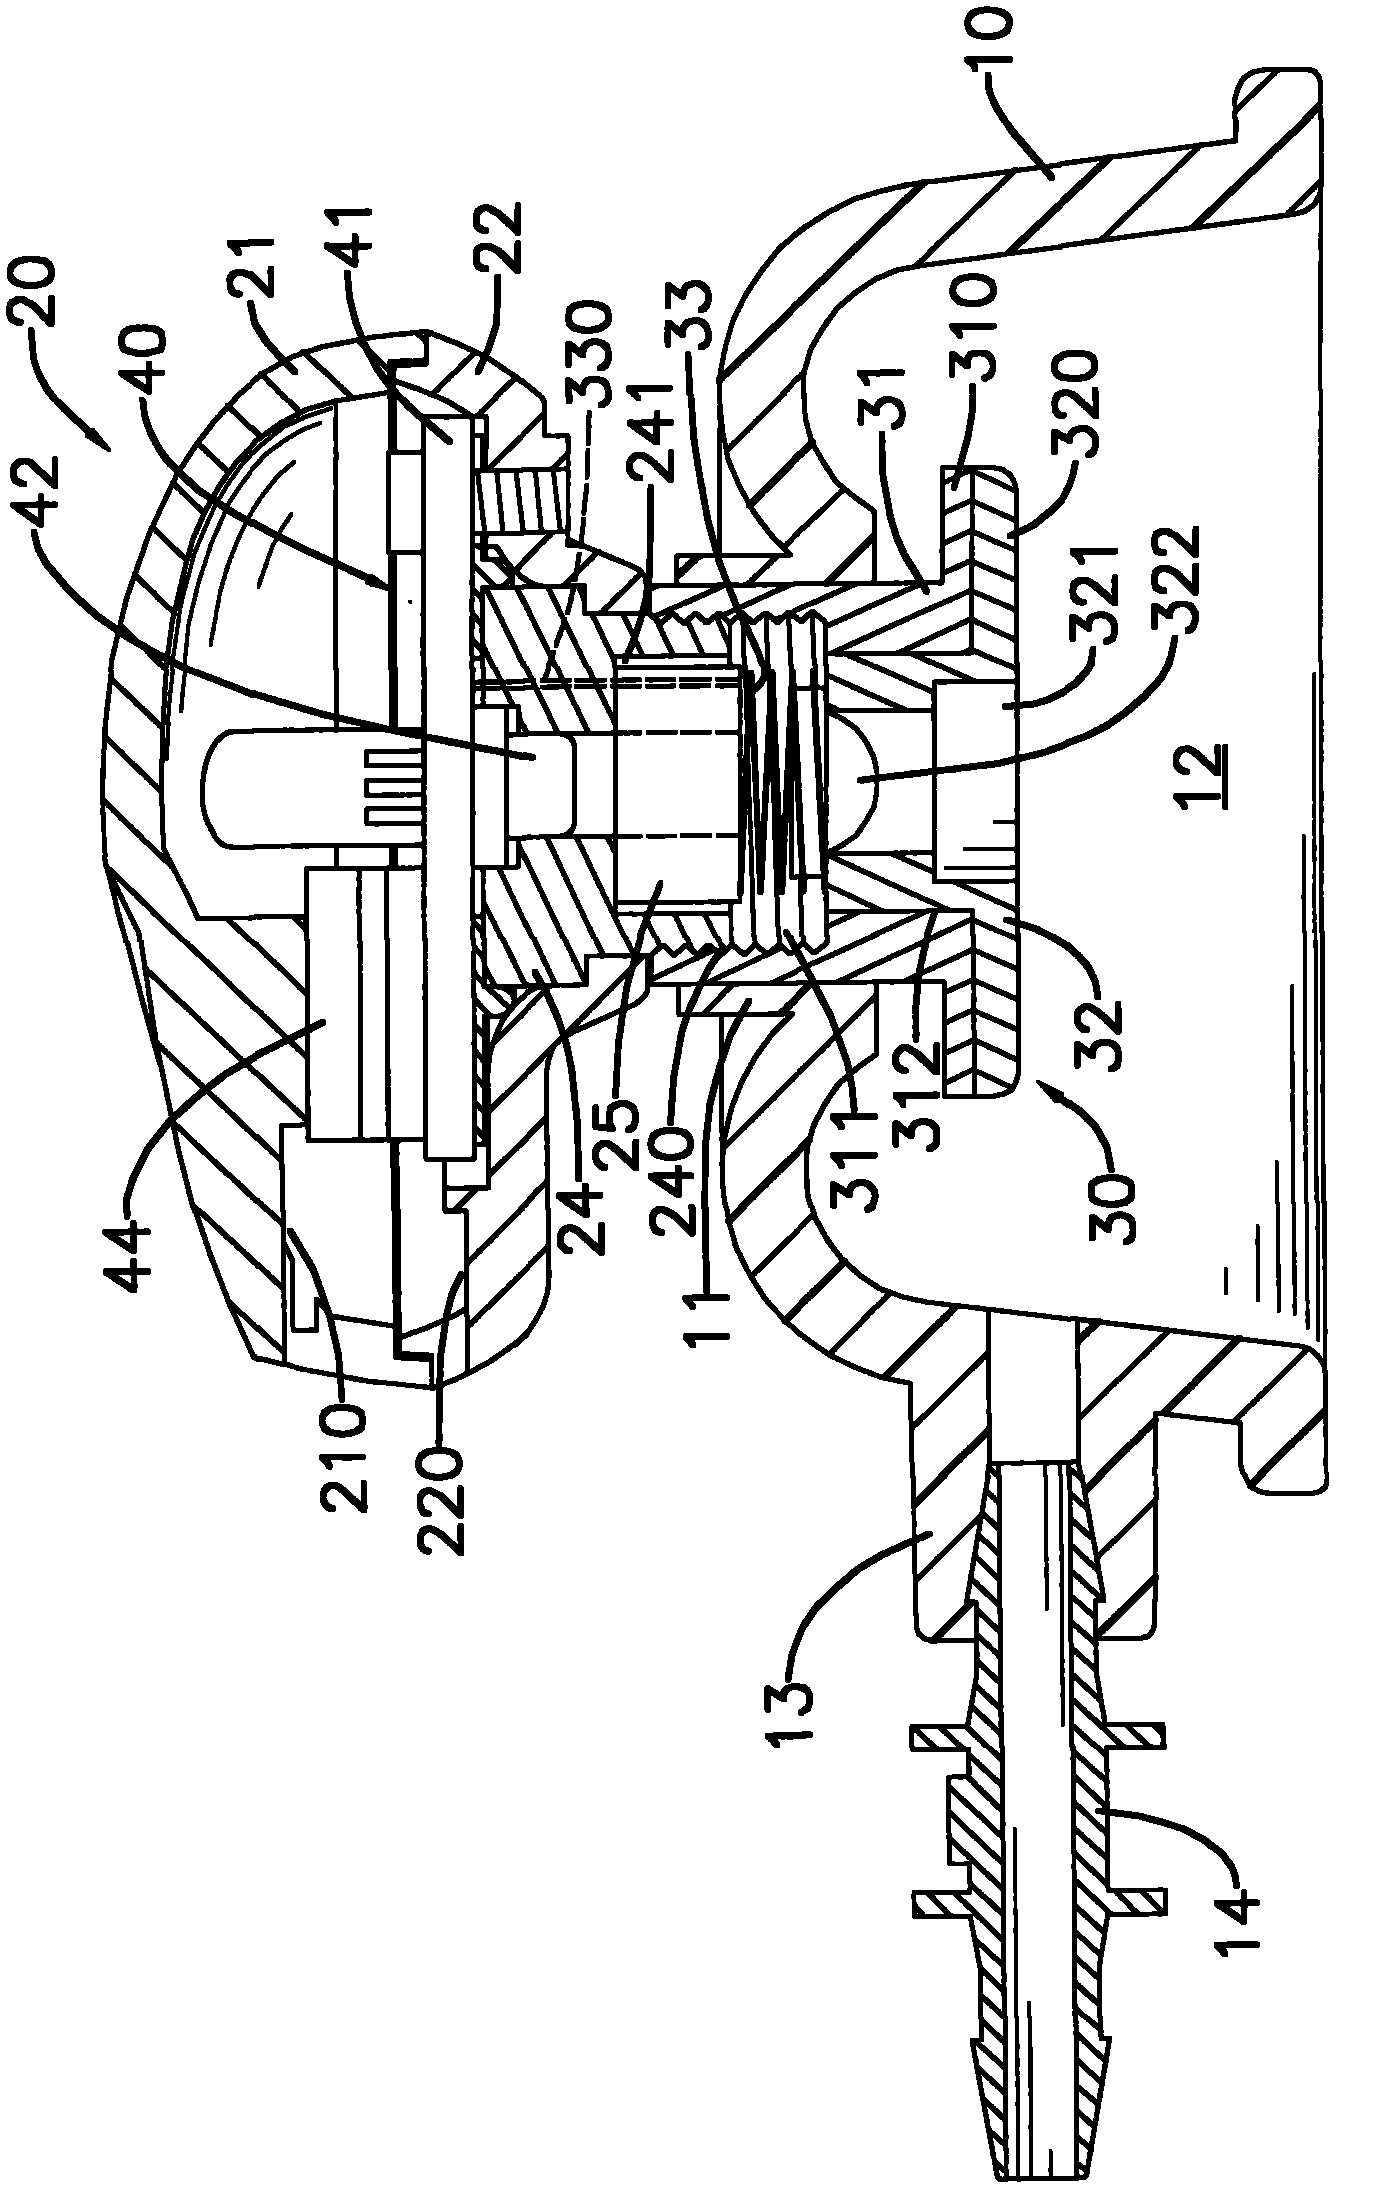 Cupping cup with phototherapy device and electrotherapy device